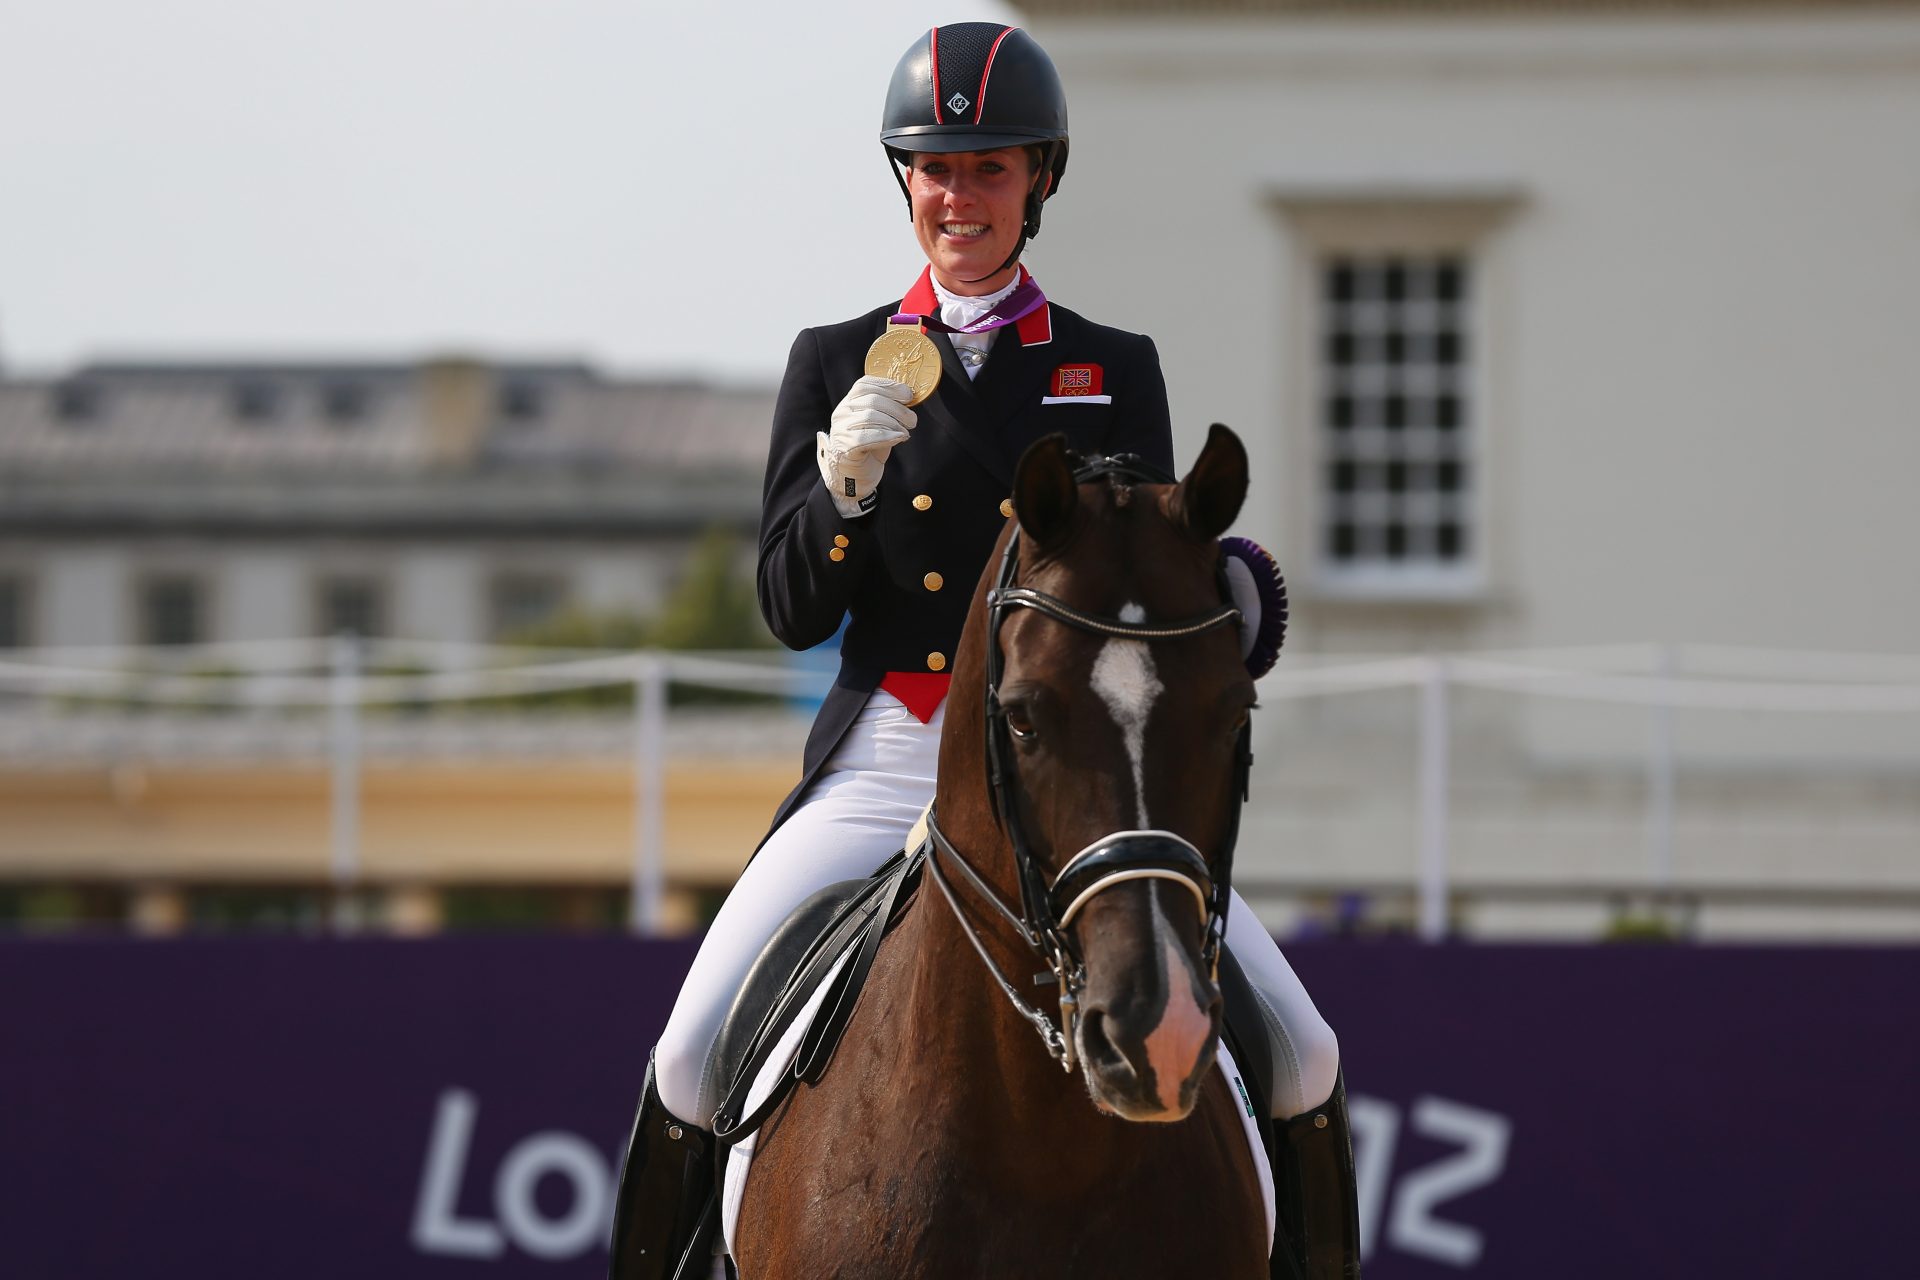 British Olympics legend Charlotte Dujardin suspended after whipping horse '24 times'